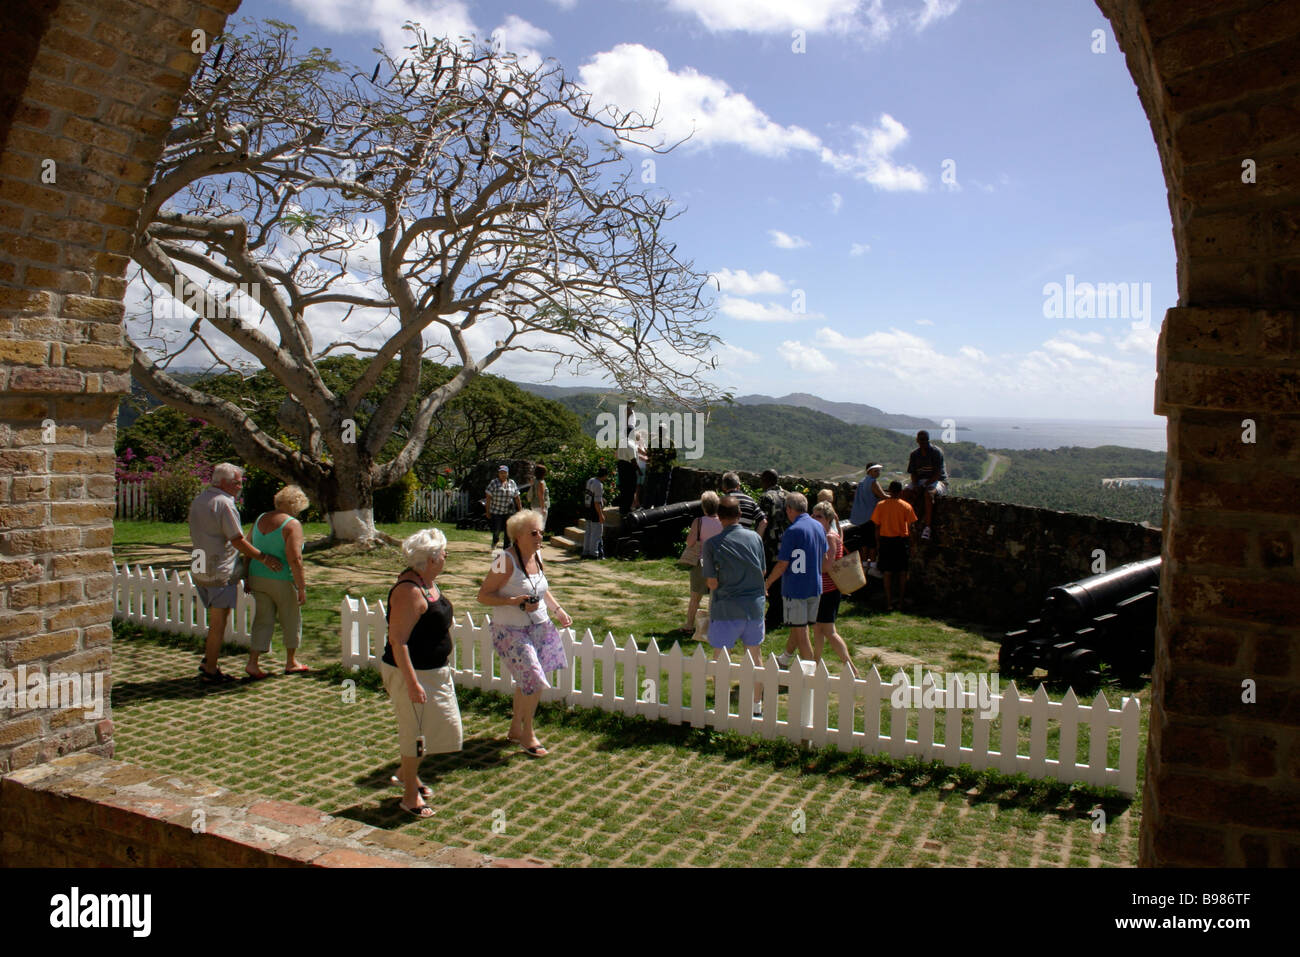 Fort King George British fort built in 1777 View over surrounding country People Tour party SCARBOROUGH TOBAGO Stock Photo